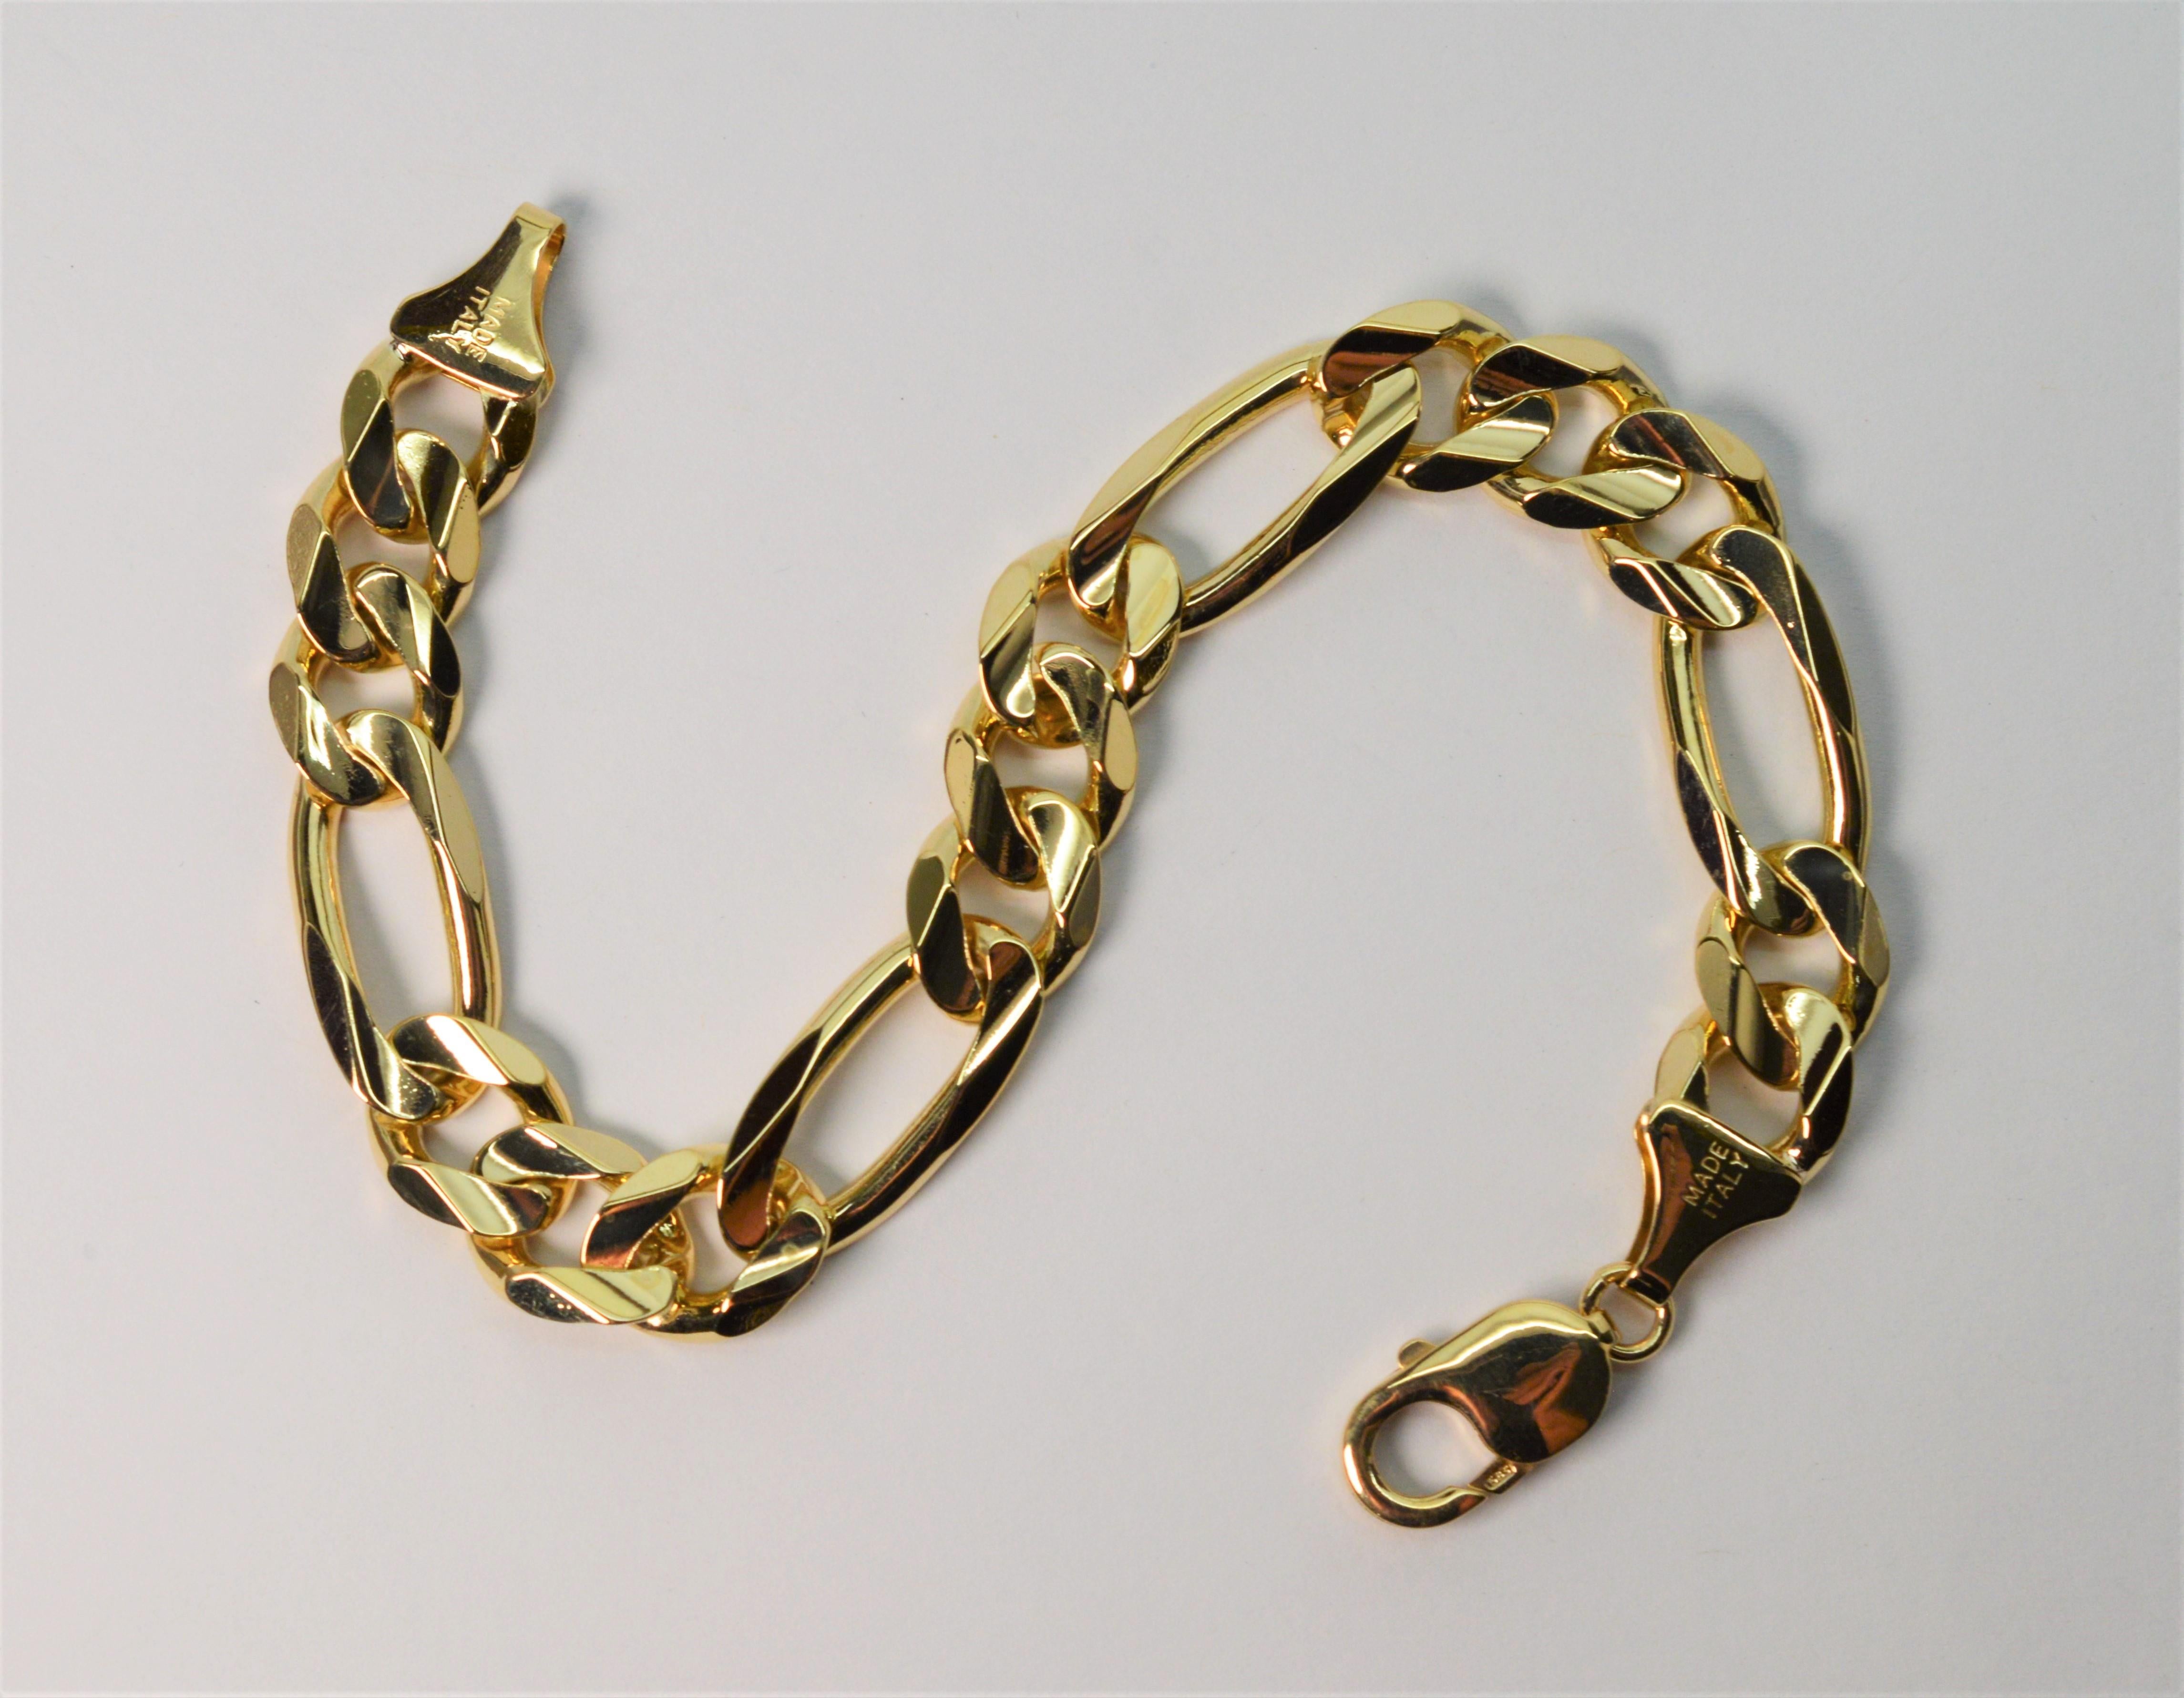 Italian made fourteen karat 14K yellow gold flat Figaro style chain bracelet. Unisex.
Nine inches in length, the bracelet links are diamond-cut  heavy 2- 3mm gauge. In excellent condition. Gift boxed.  